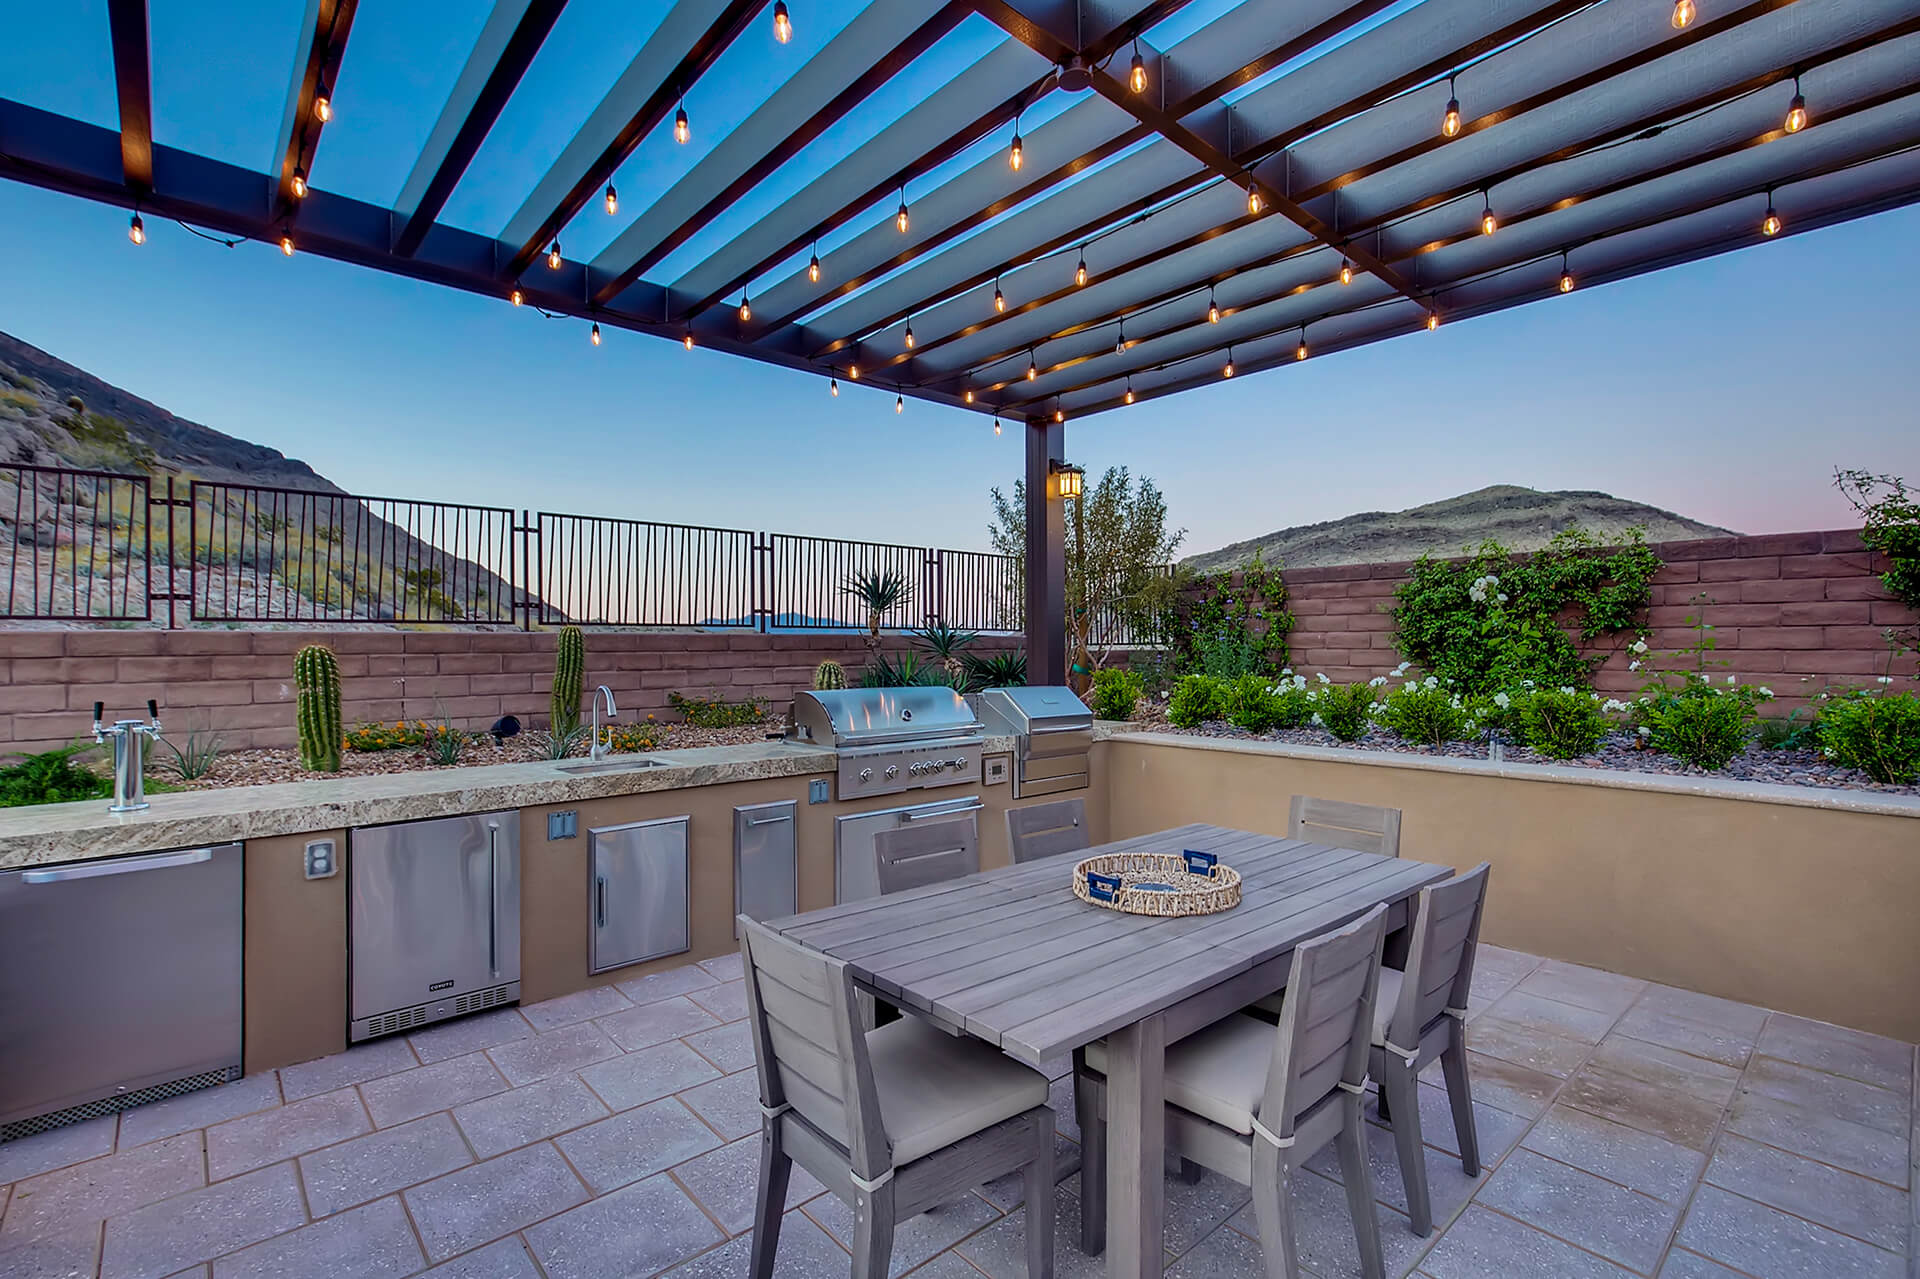 Custom Outdoor Kitchen and Living Area Design and Construction by Custom Outdoor Living of Las Vegas, Nevada